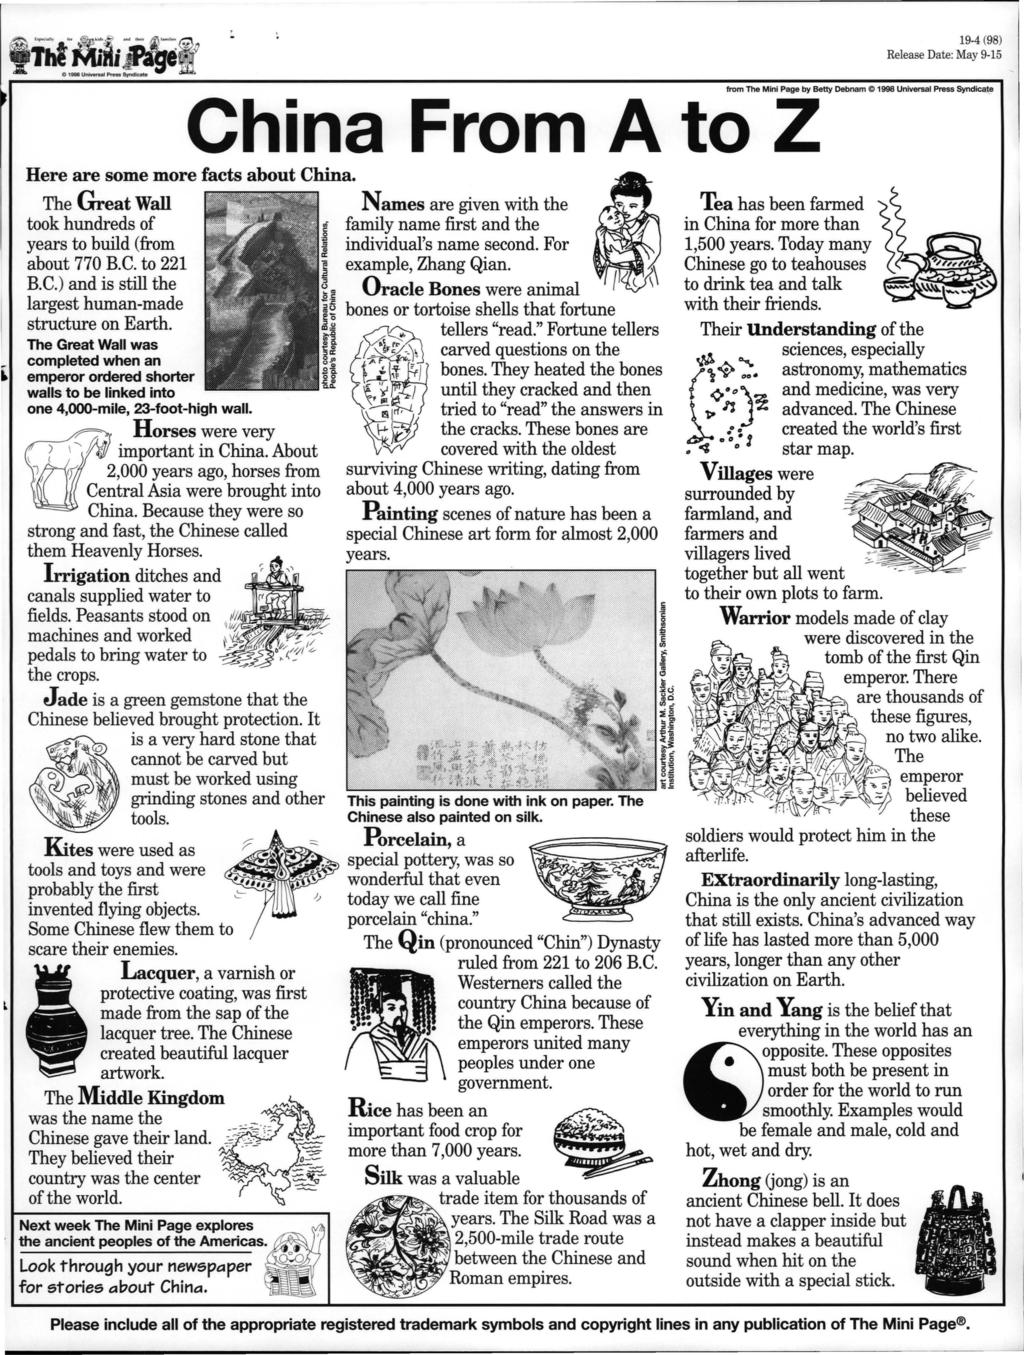 19-4 (98) from The Mini Page by Betty Debnam C 1998 Universal Press Syndics.!!' China From A to Z Here are some more facts about China.